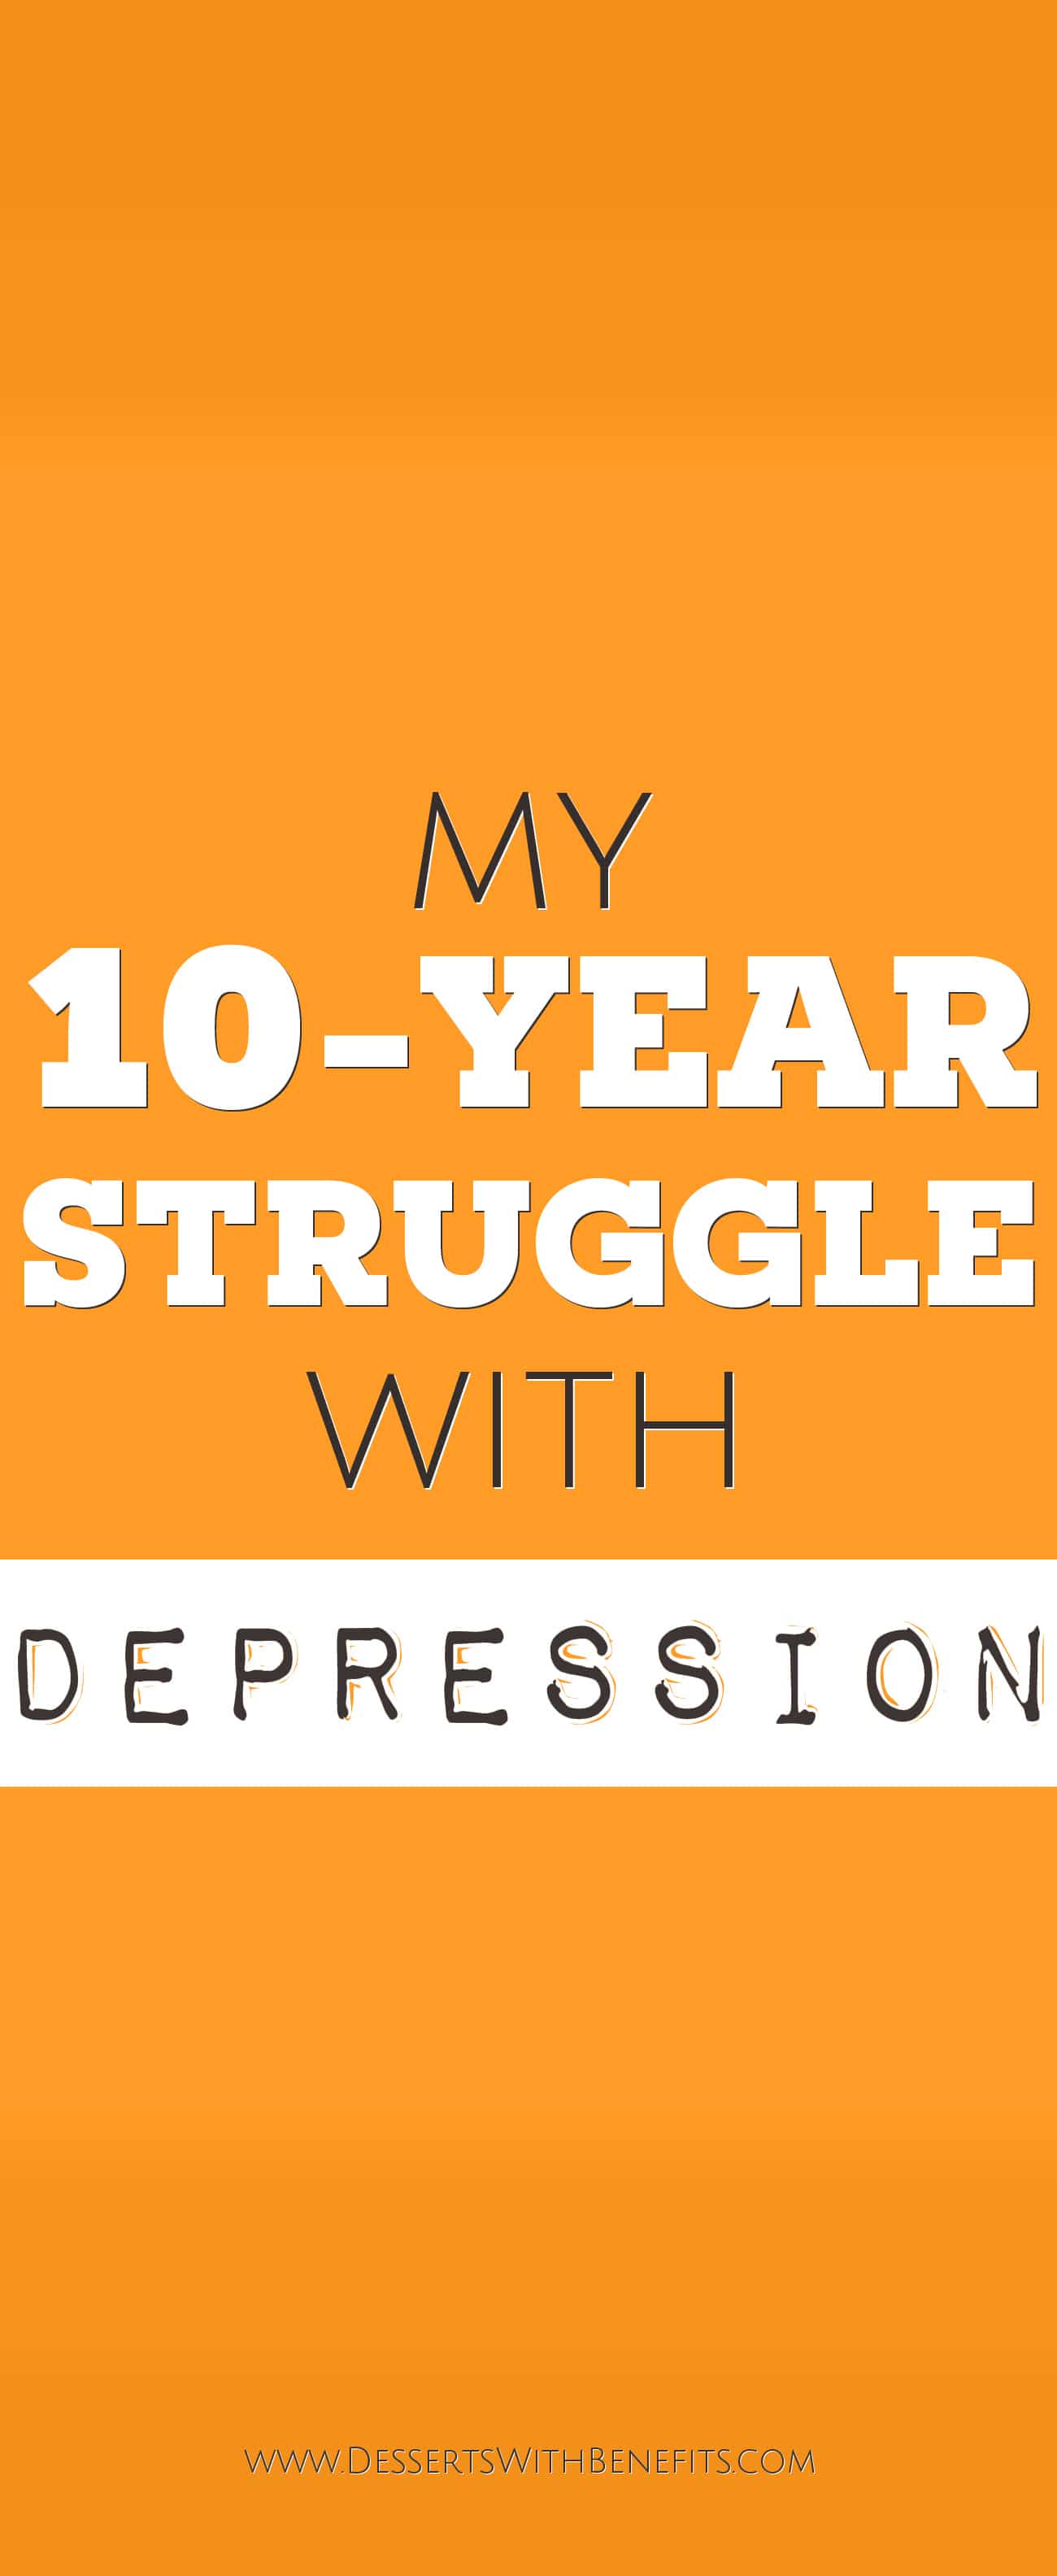 My 10-Year Struggle With Depression -- Jessica Stier of the Desserts With Benefits Blog